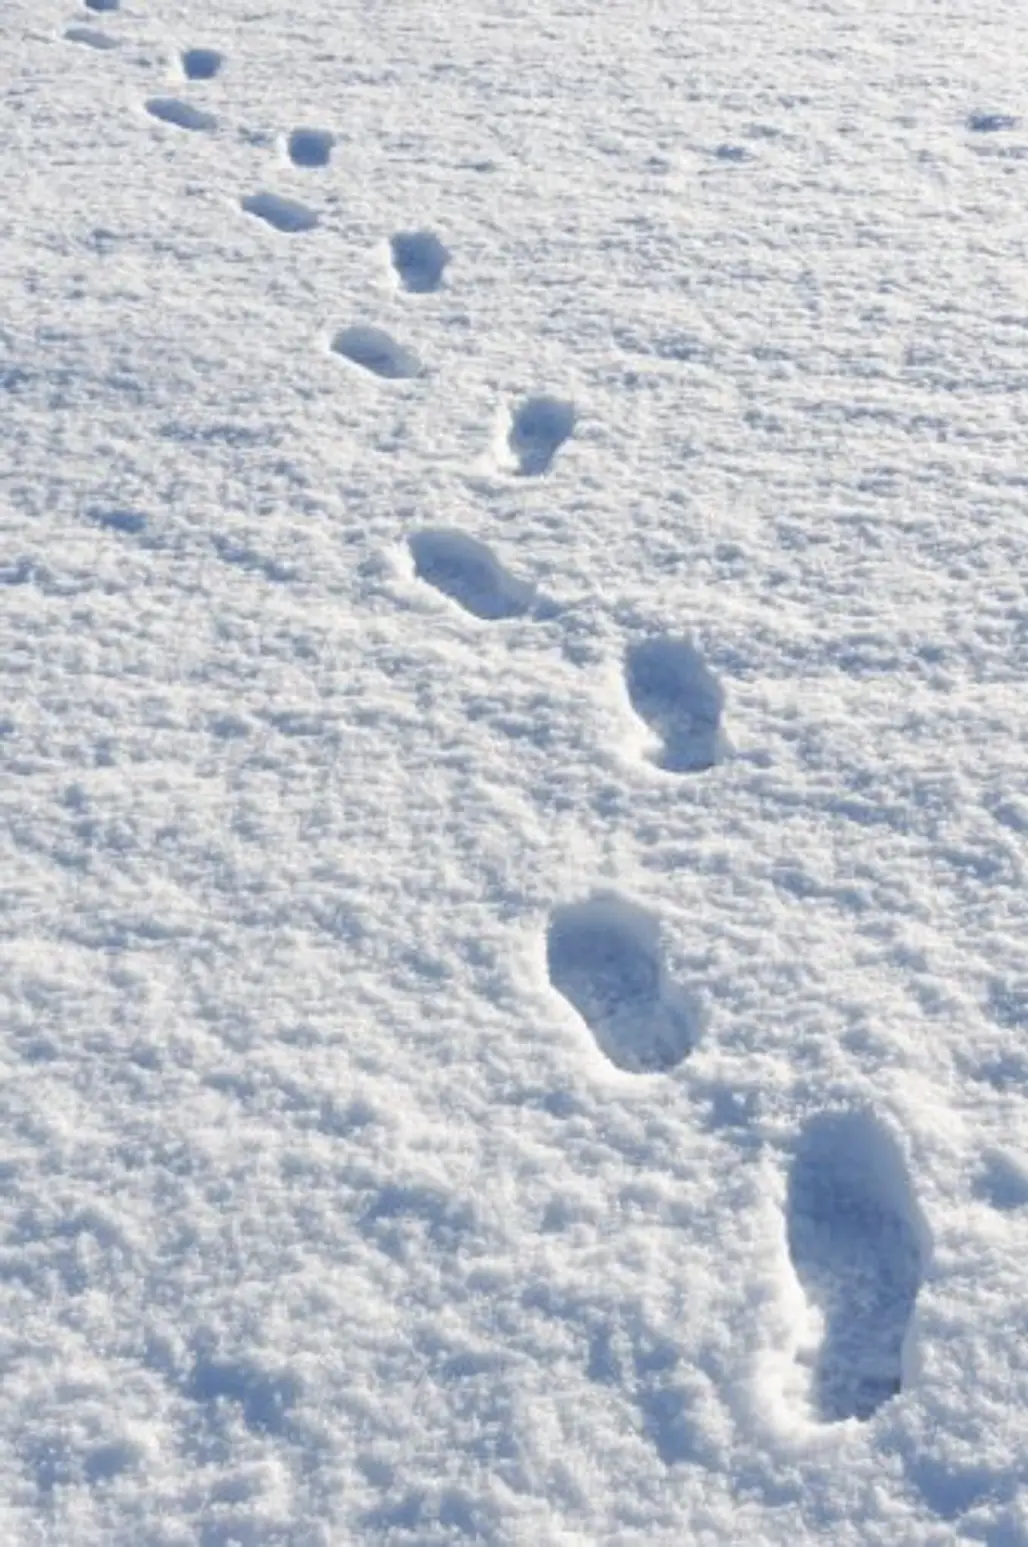 Being the First to Make Footprints in the Snow